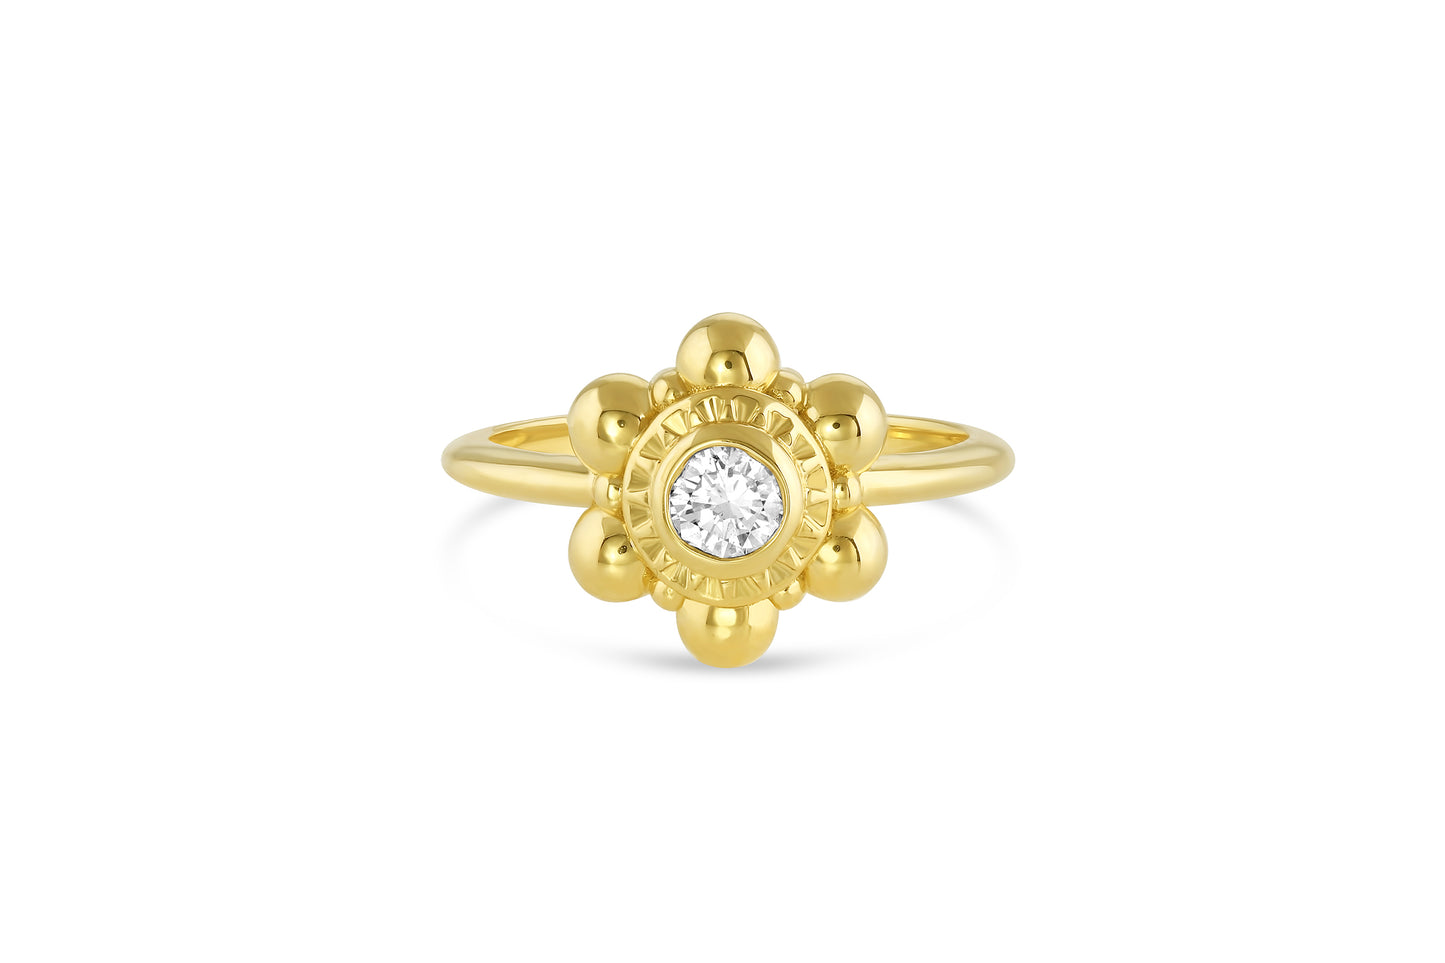 Load image into Gallery viewer, 18k yellow gold flower shaped ring with diamond center stone on white background.
